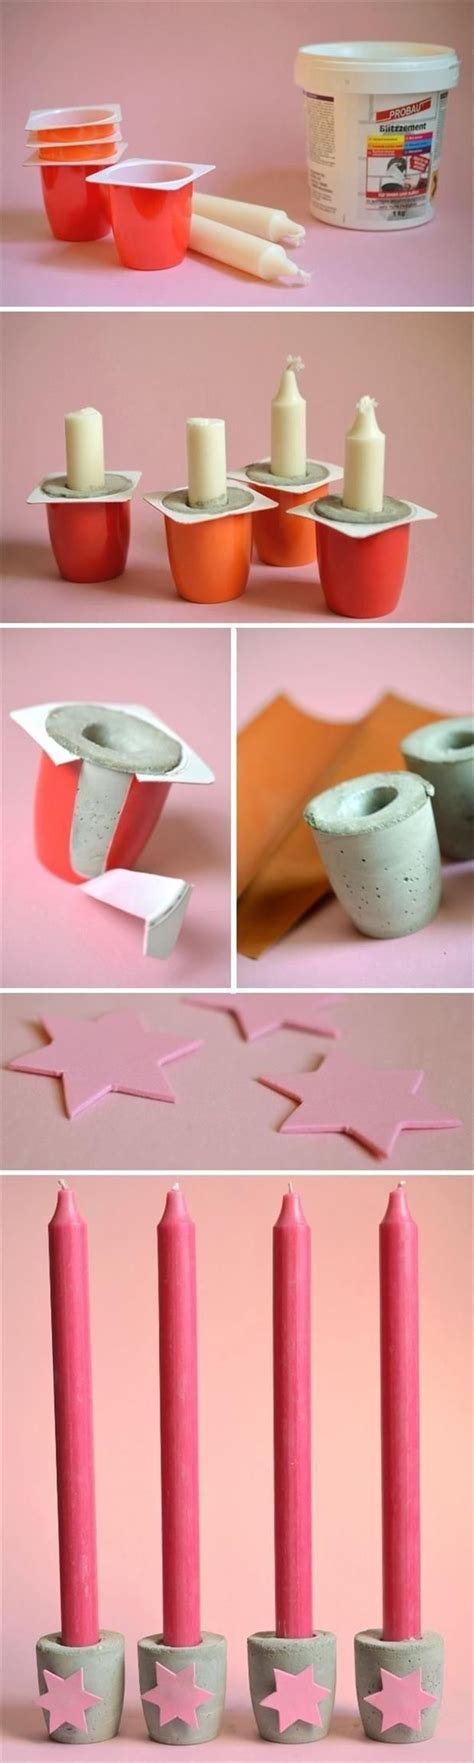 Easy Diy Crafts You Can Make With Things Around The House